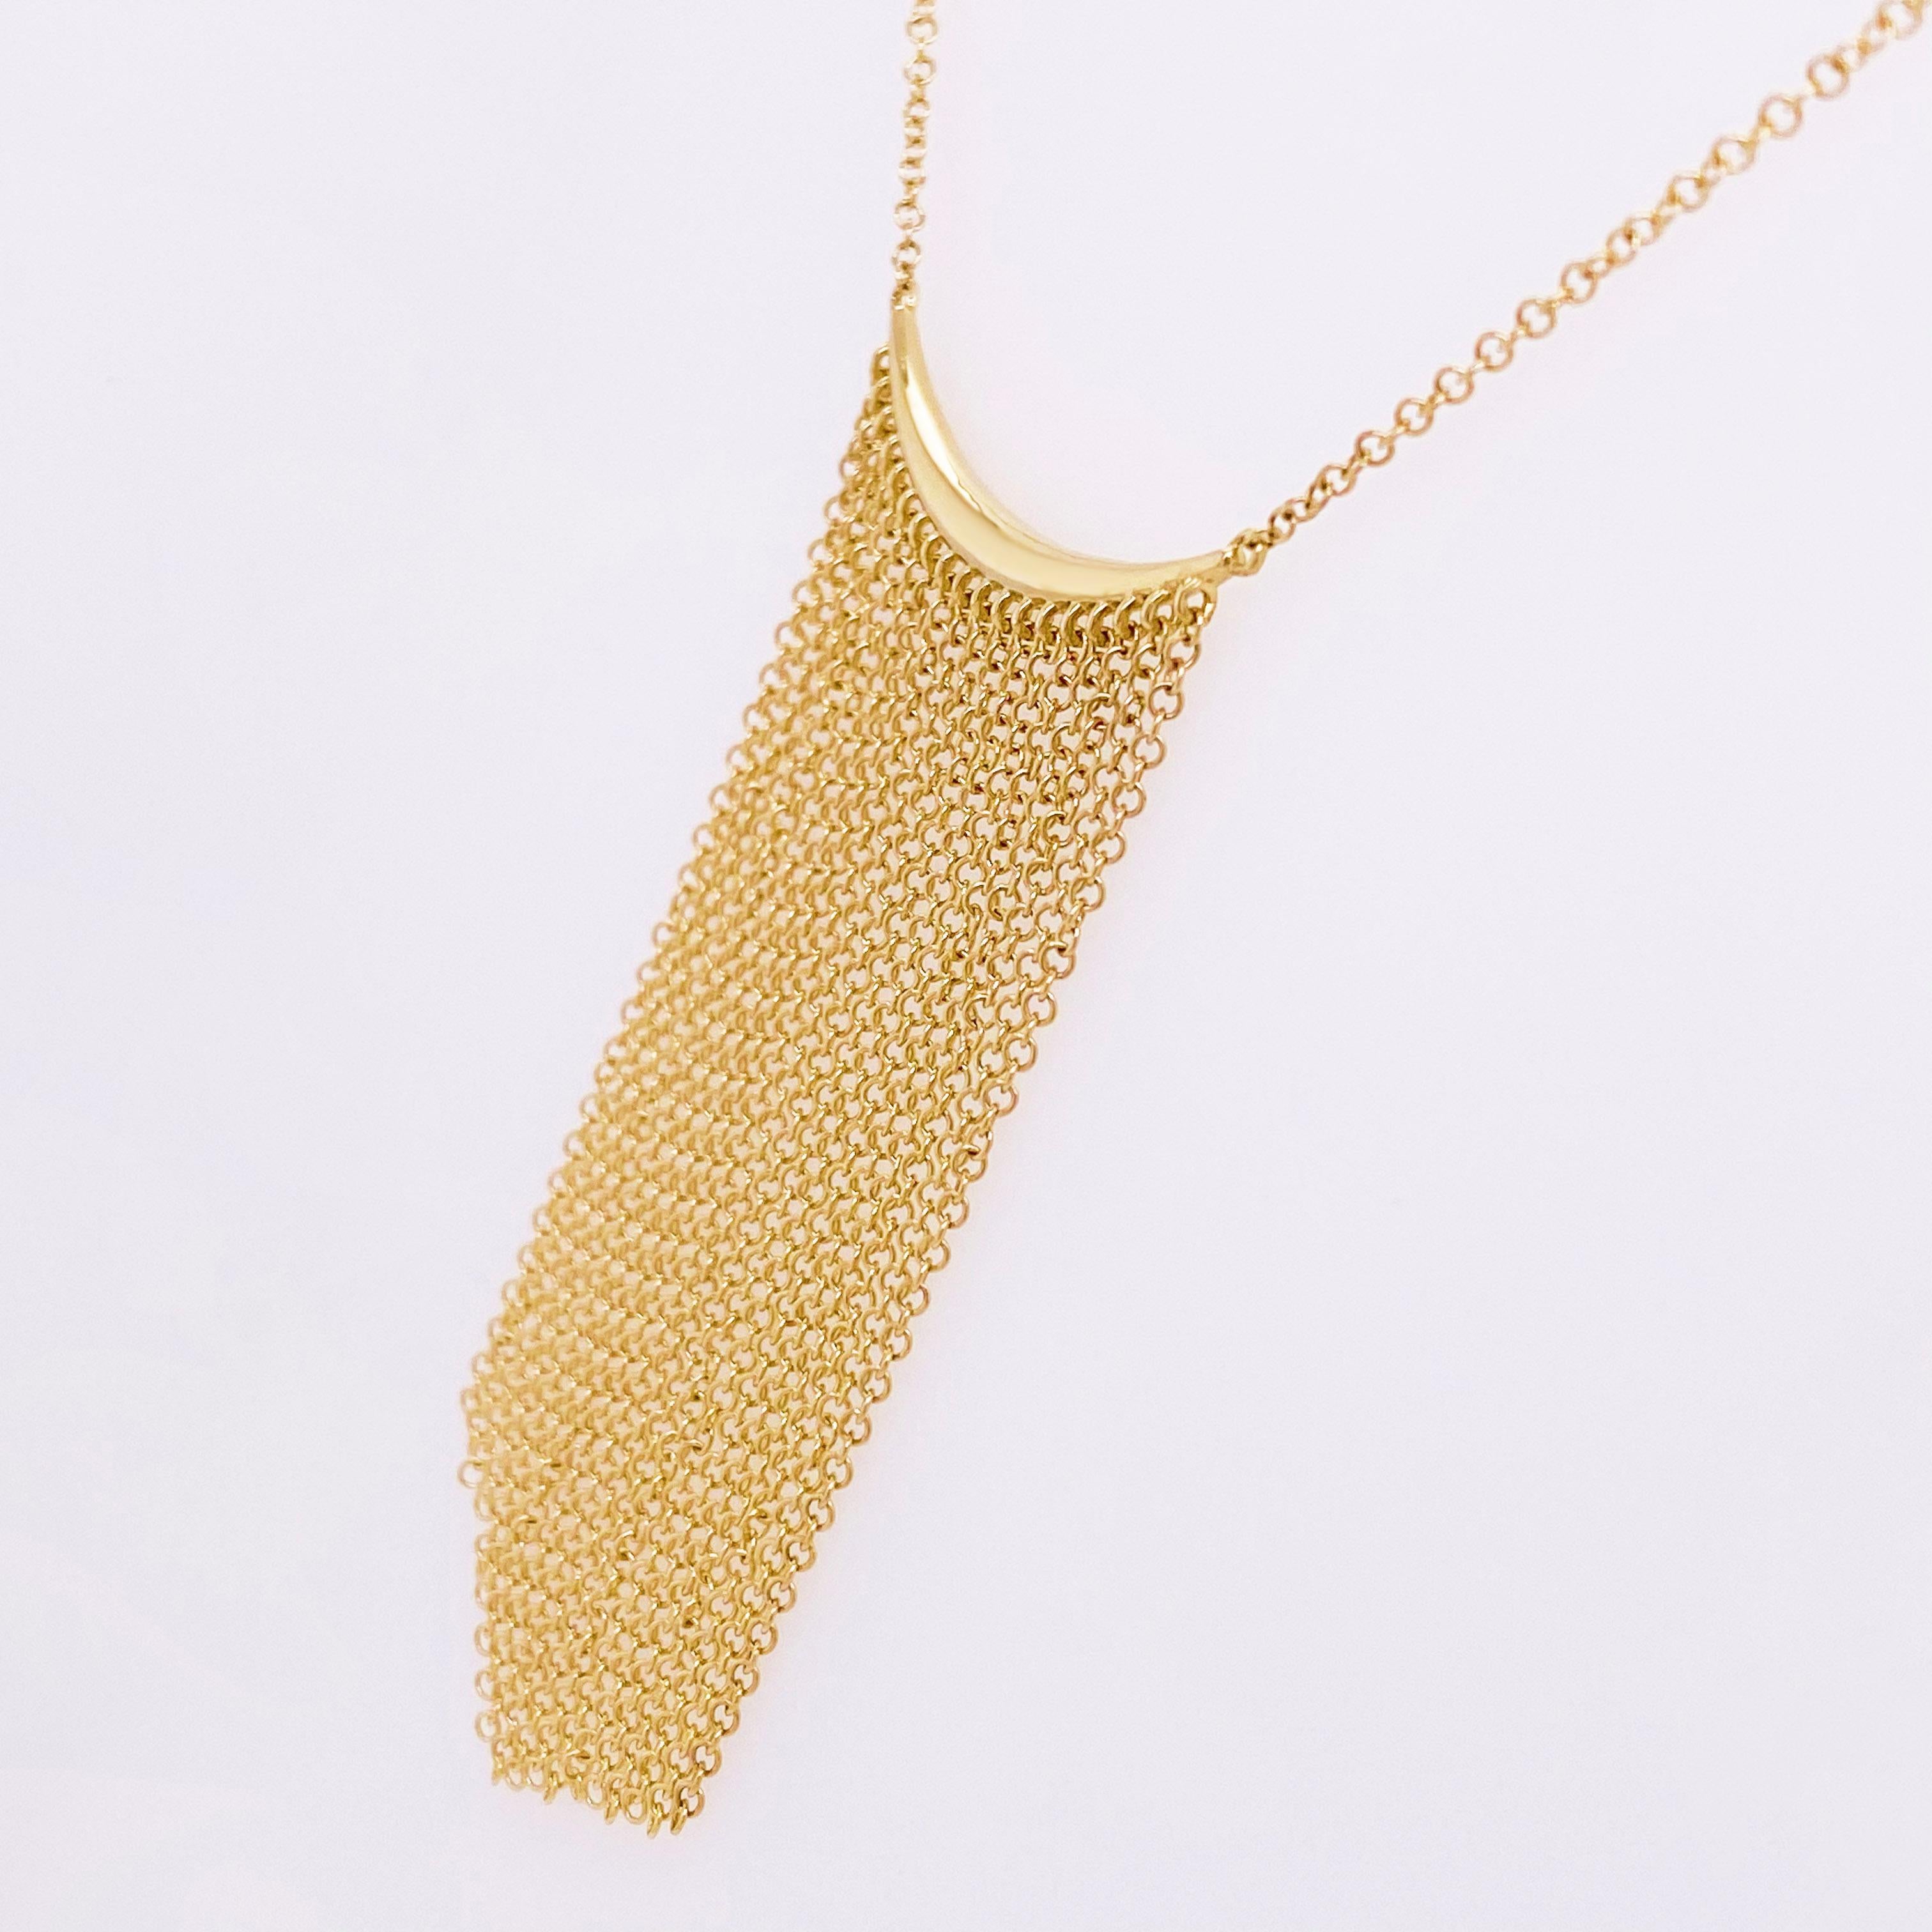 Contemporary Waterfall Chain Necklace, 14 Karat Yellow Gold Curved Bar, NeckMess For Sale